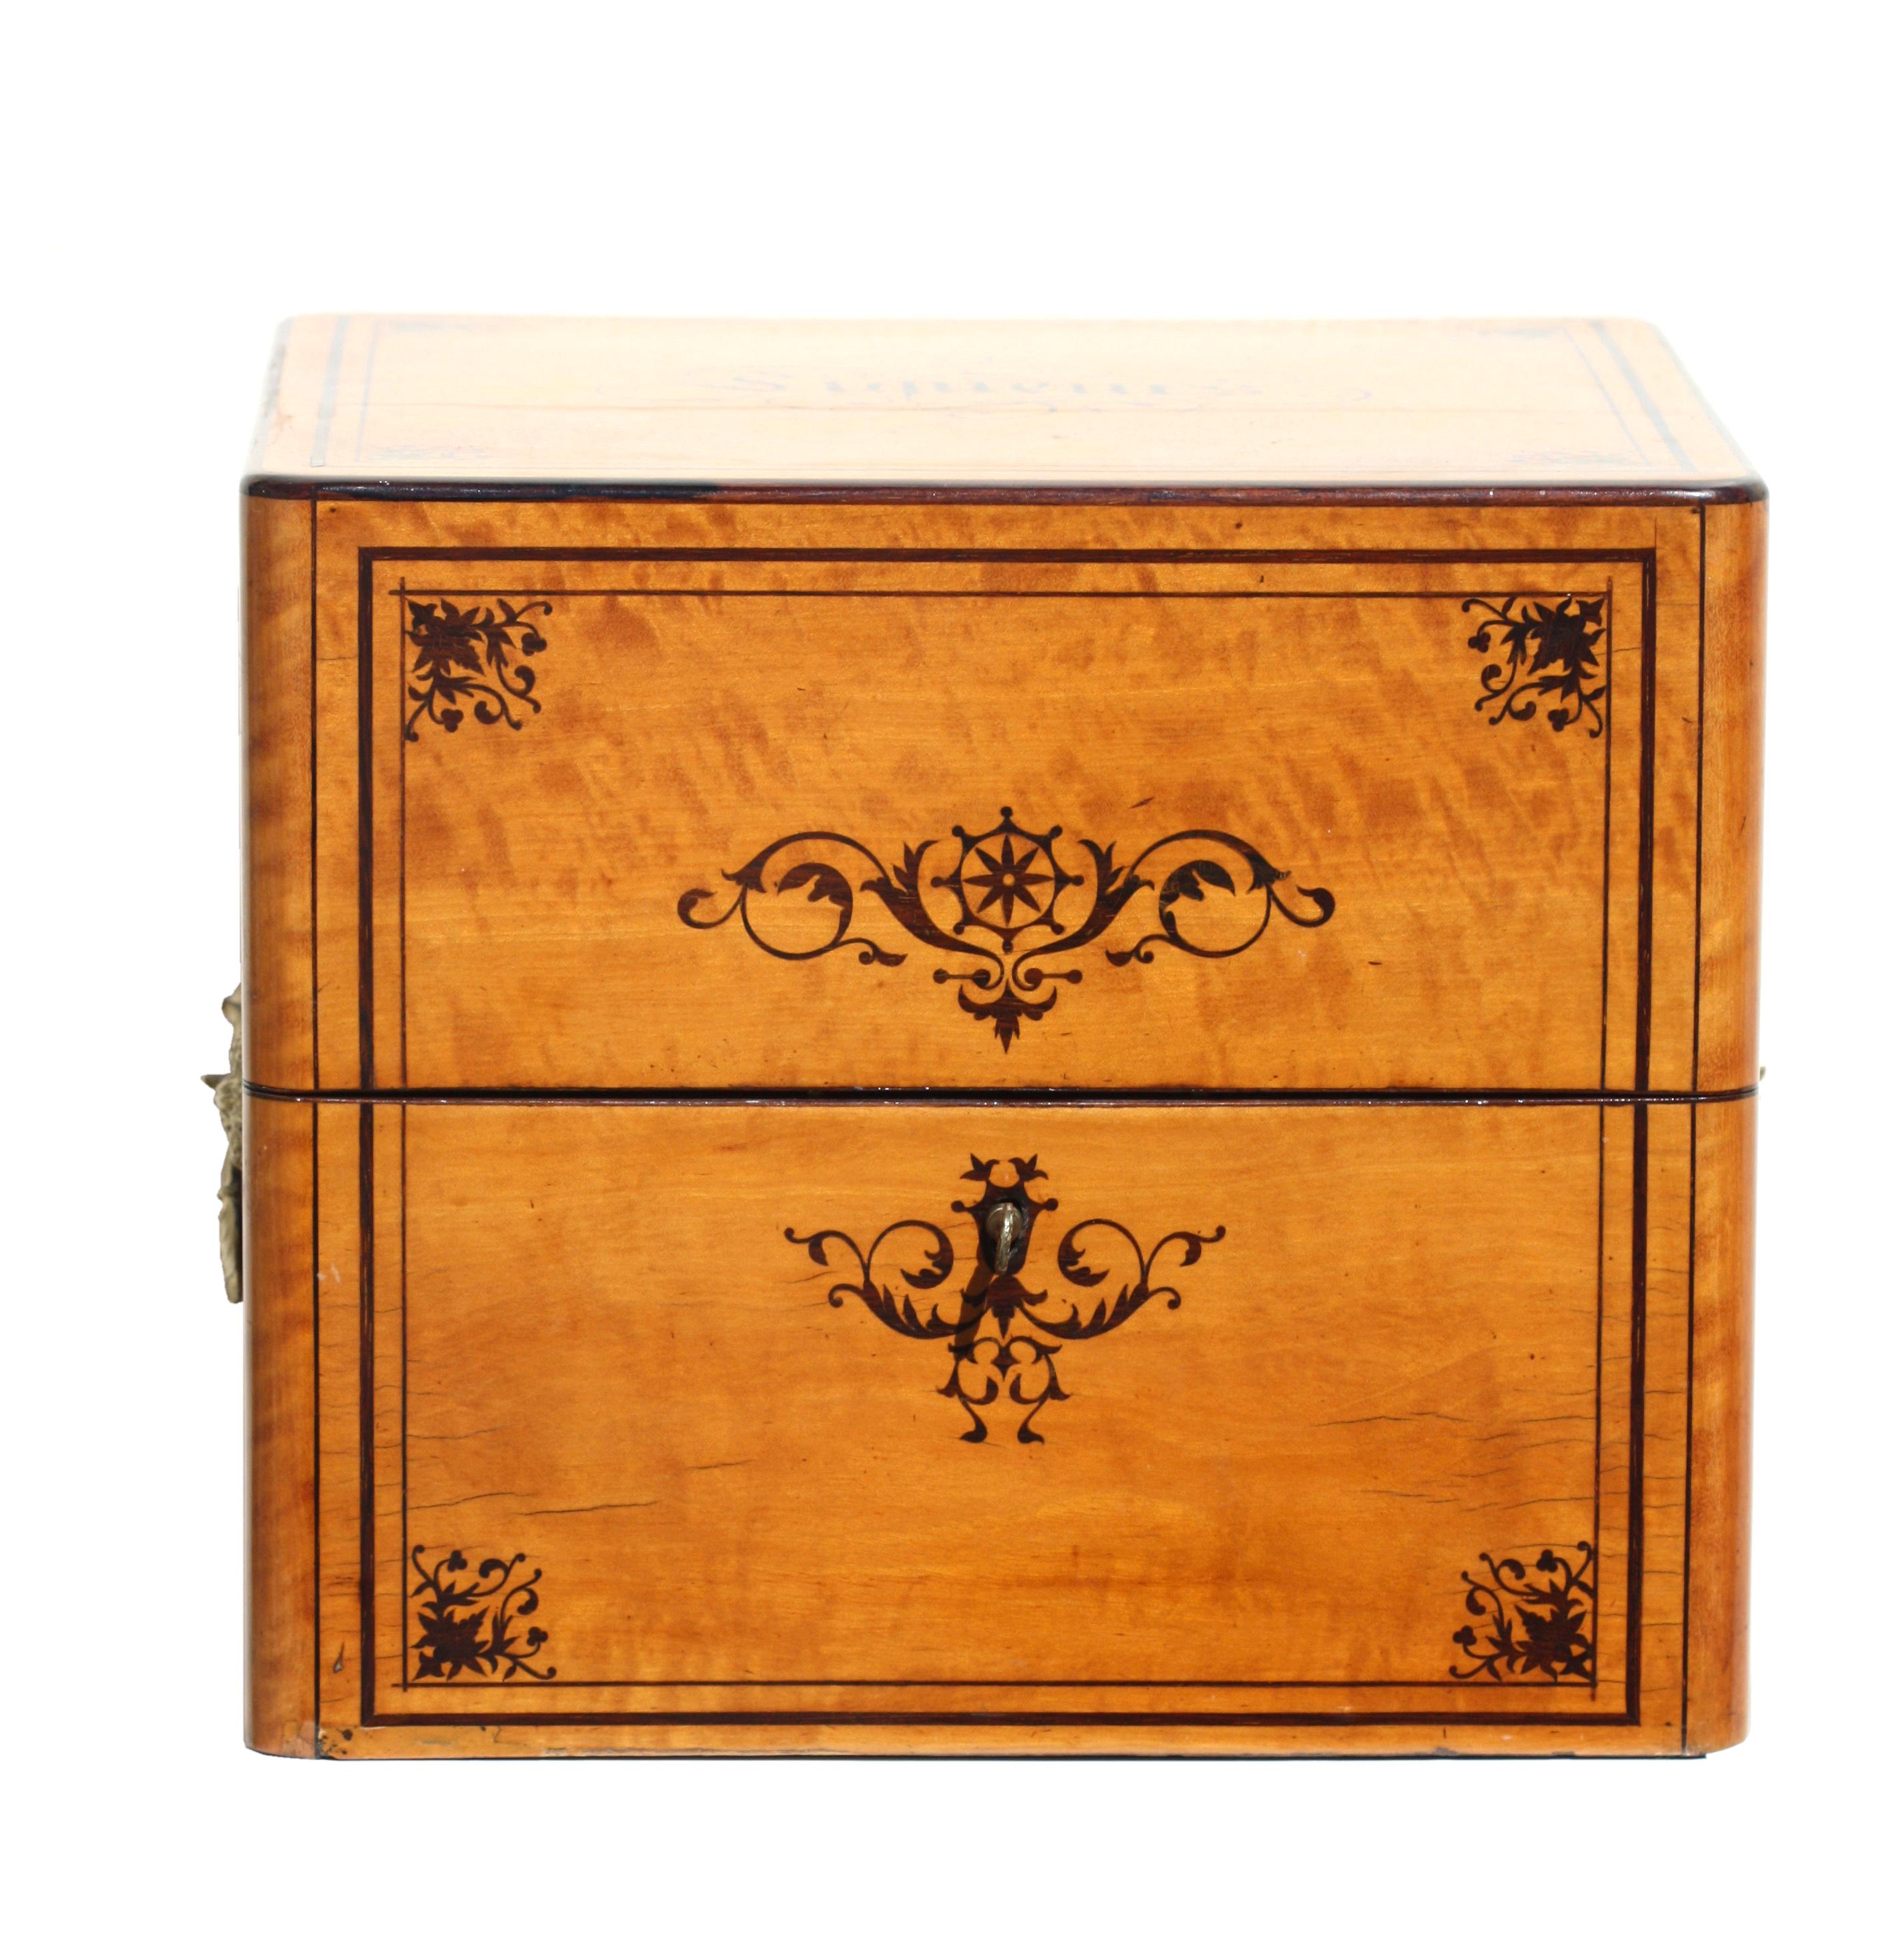 Regency burl wood and inlaid liquor Tantalus 
case in a light burl wood with ebonized inlaid panels, the top with inlaid script 